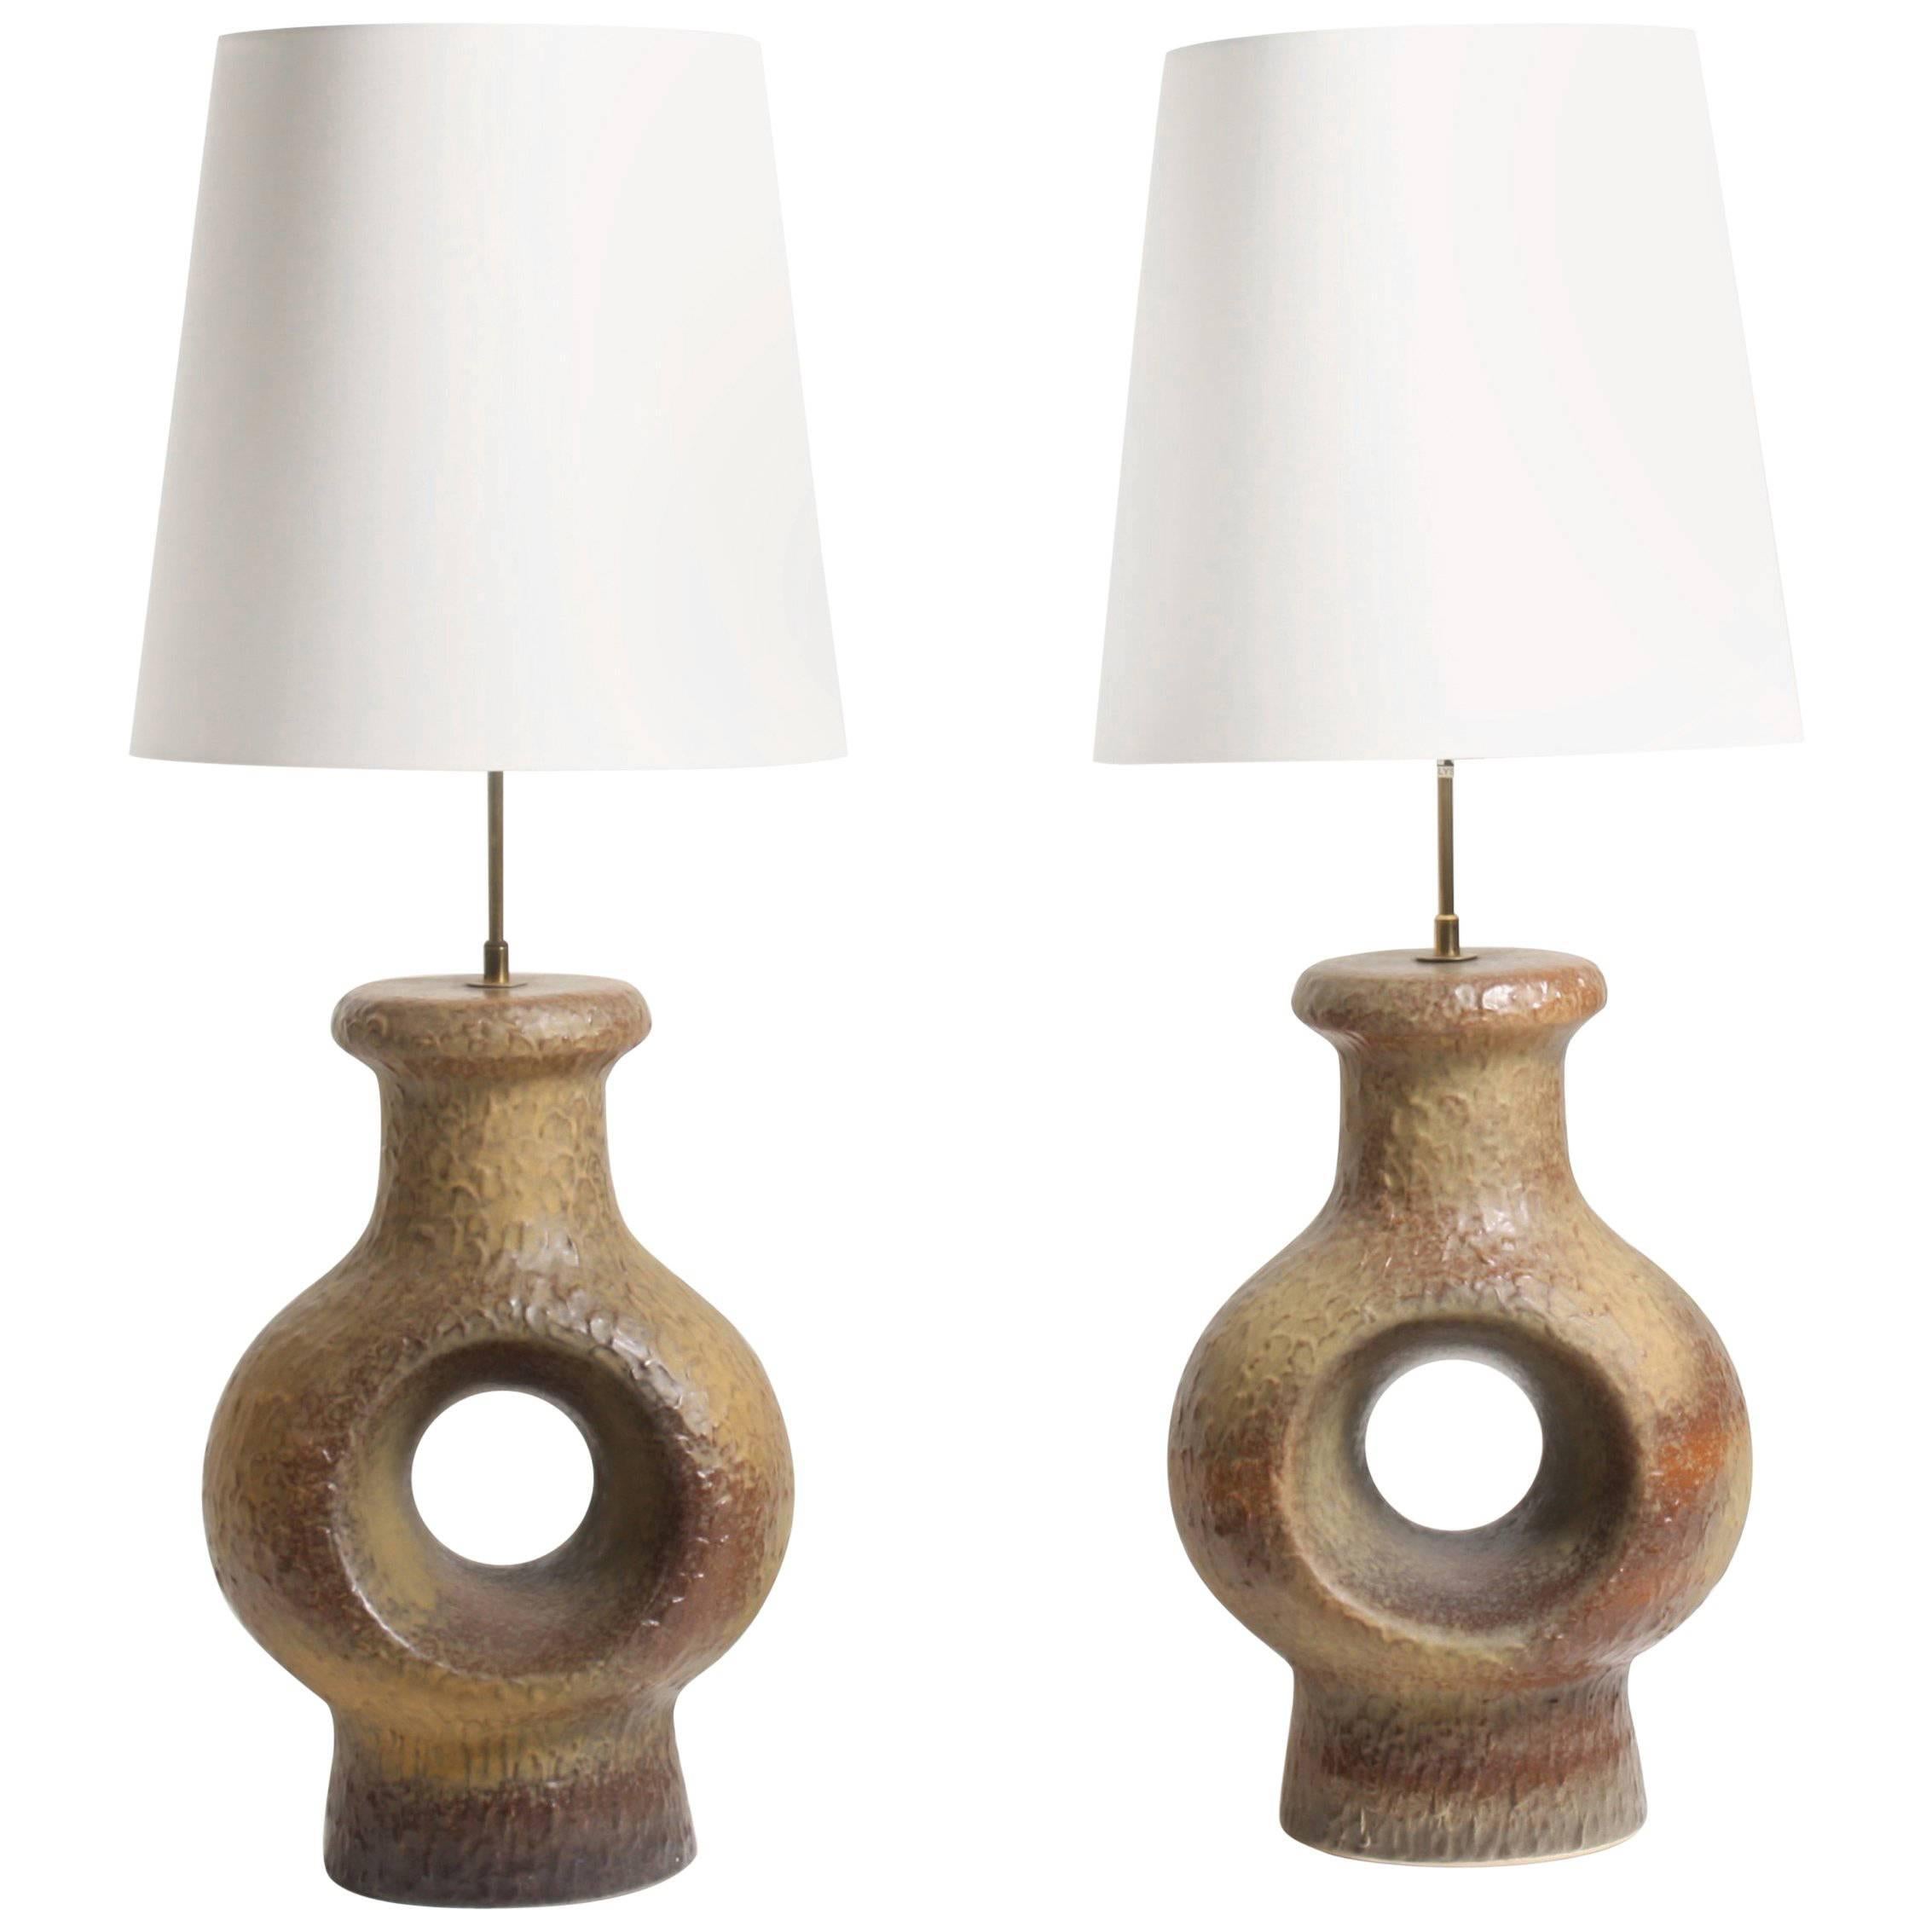 Pair of Large Artefact Table Lamps with Great Detailing